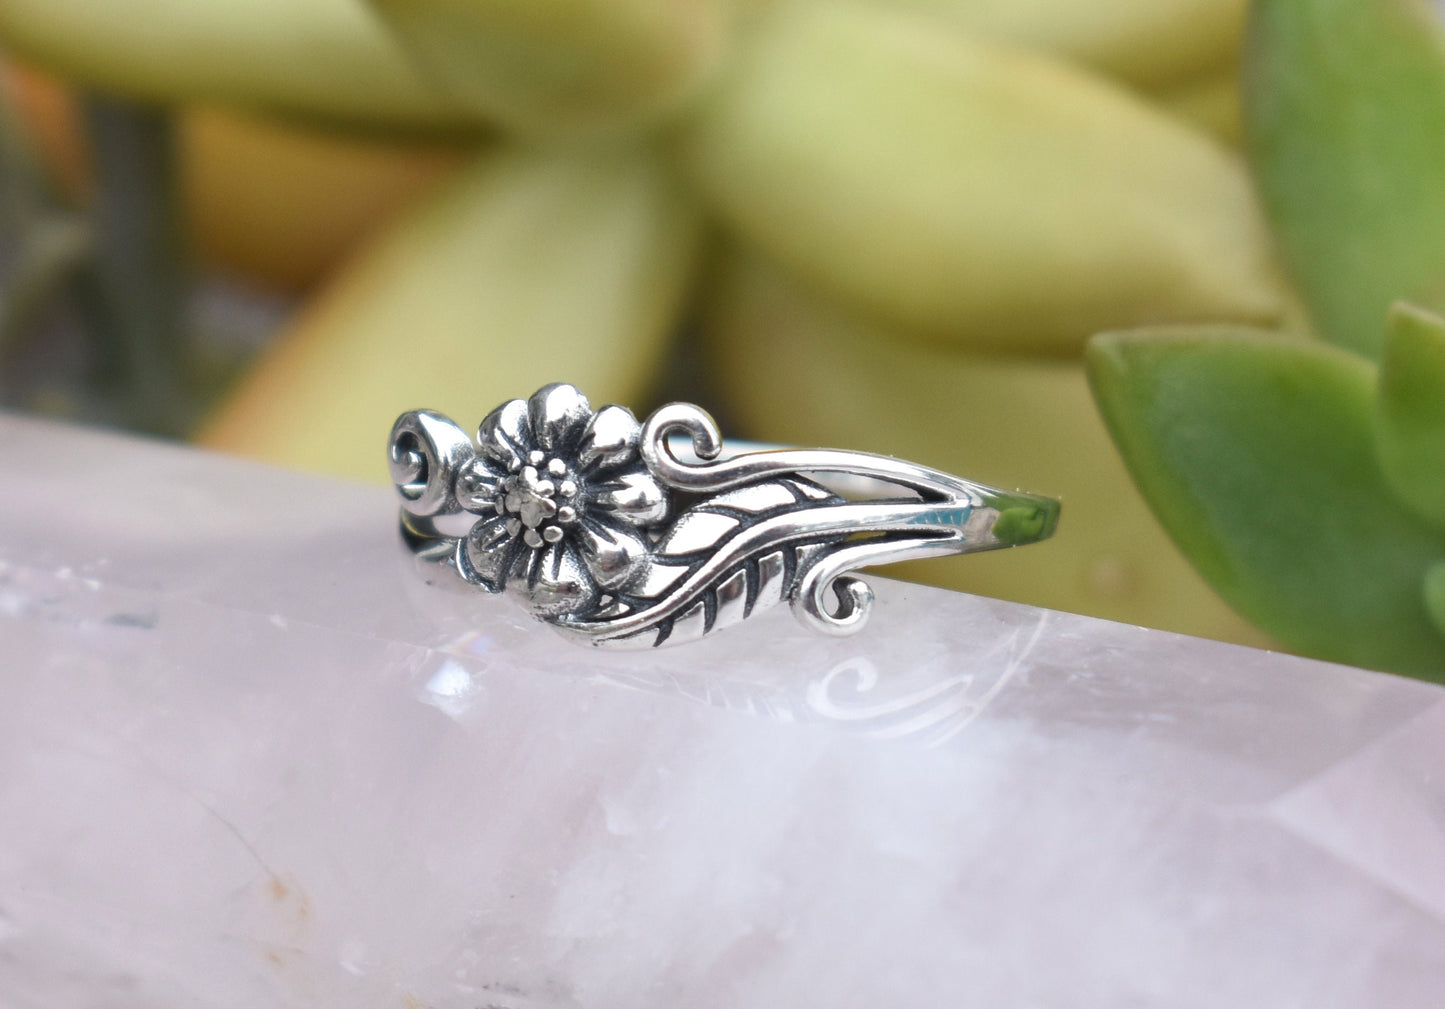 Flower Ring- Floral Ring, Daisy Ring, Y2k Ring- Cottagecore-Sterling Silver Ring